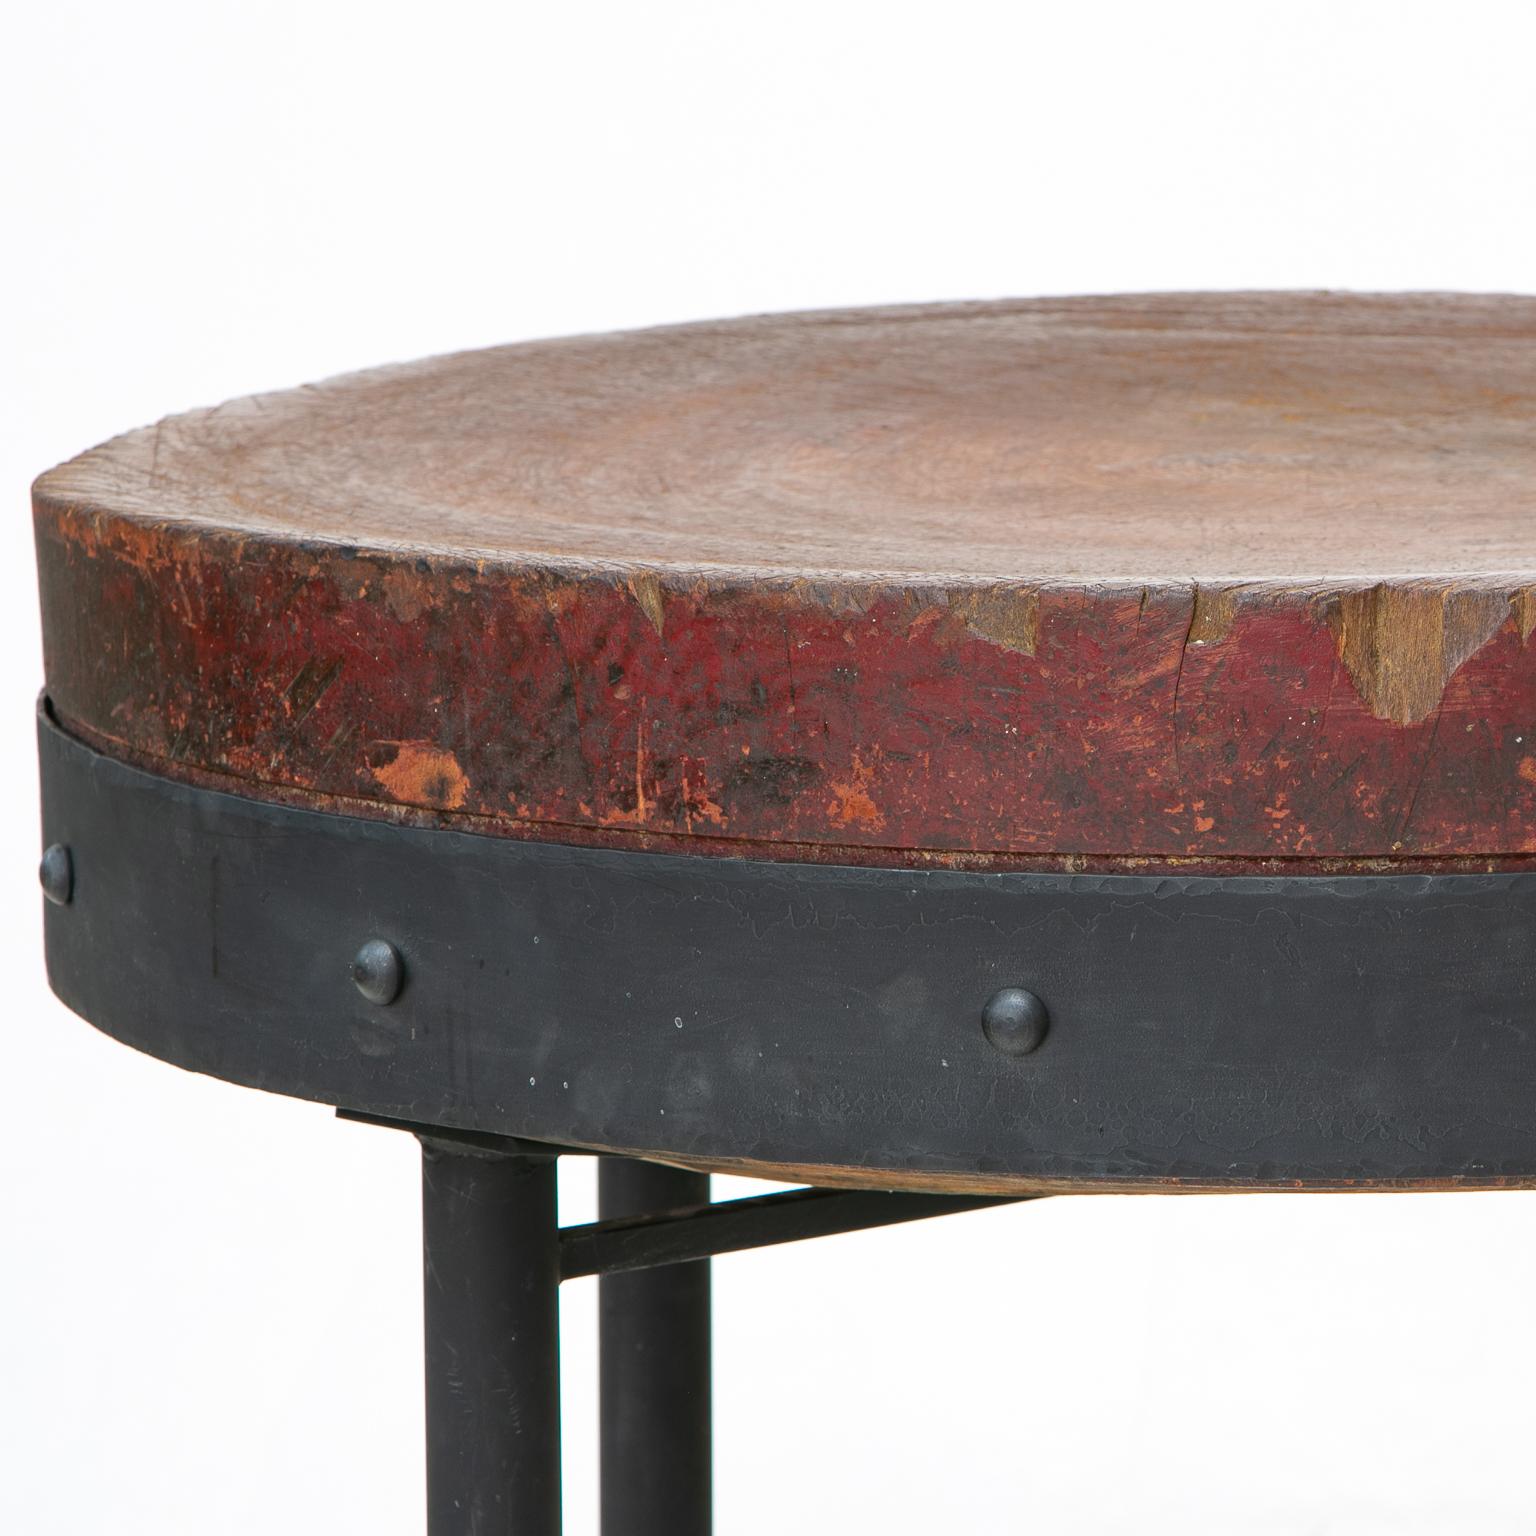 This is a very unique round butcher block top from one solid cut wood from a tree. The iron base was made for the top by a notable ironsmith in Nashville, TN. Very sturdy and well preserved. The previous owner applied butcher block oil once a week